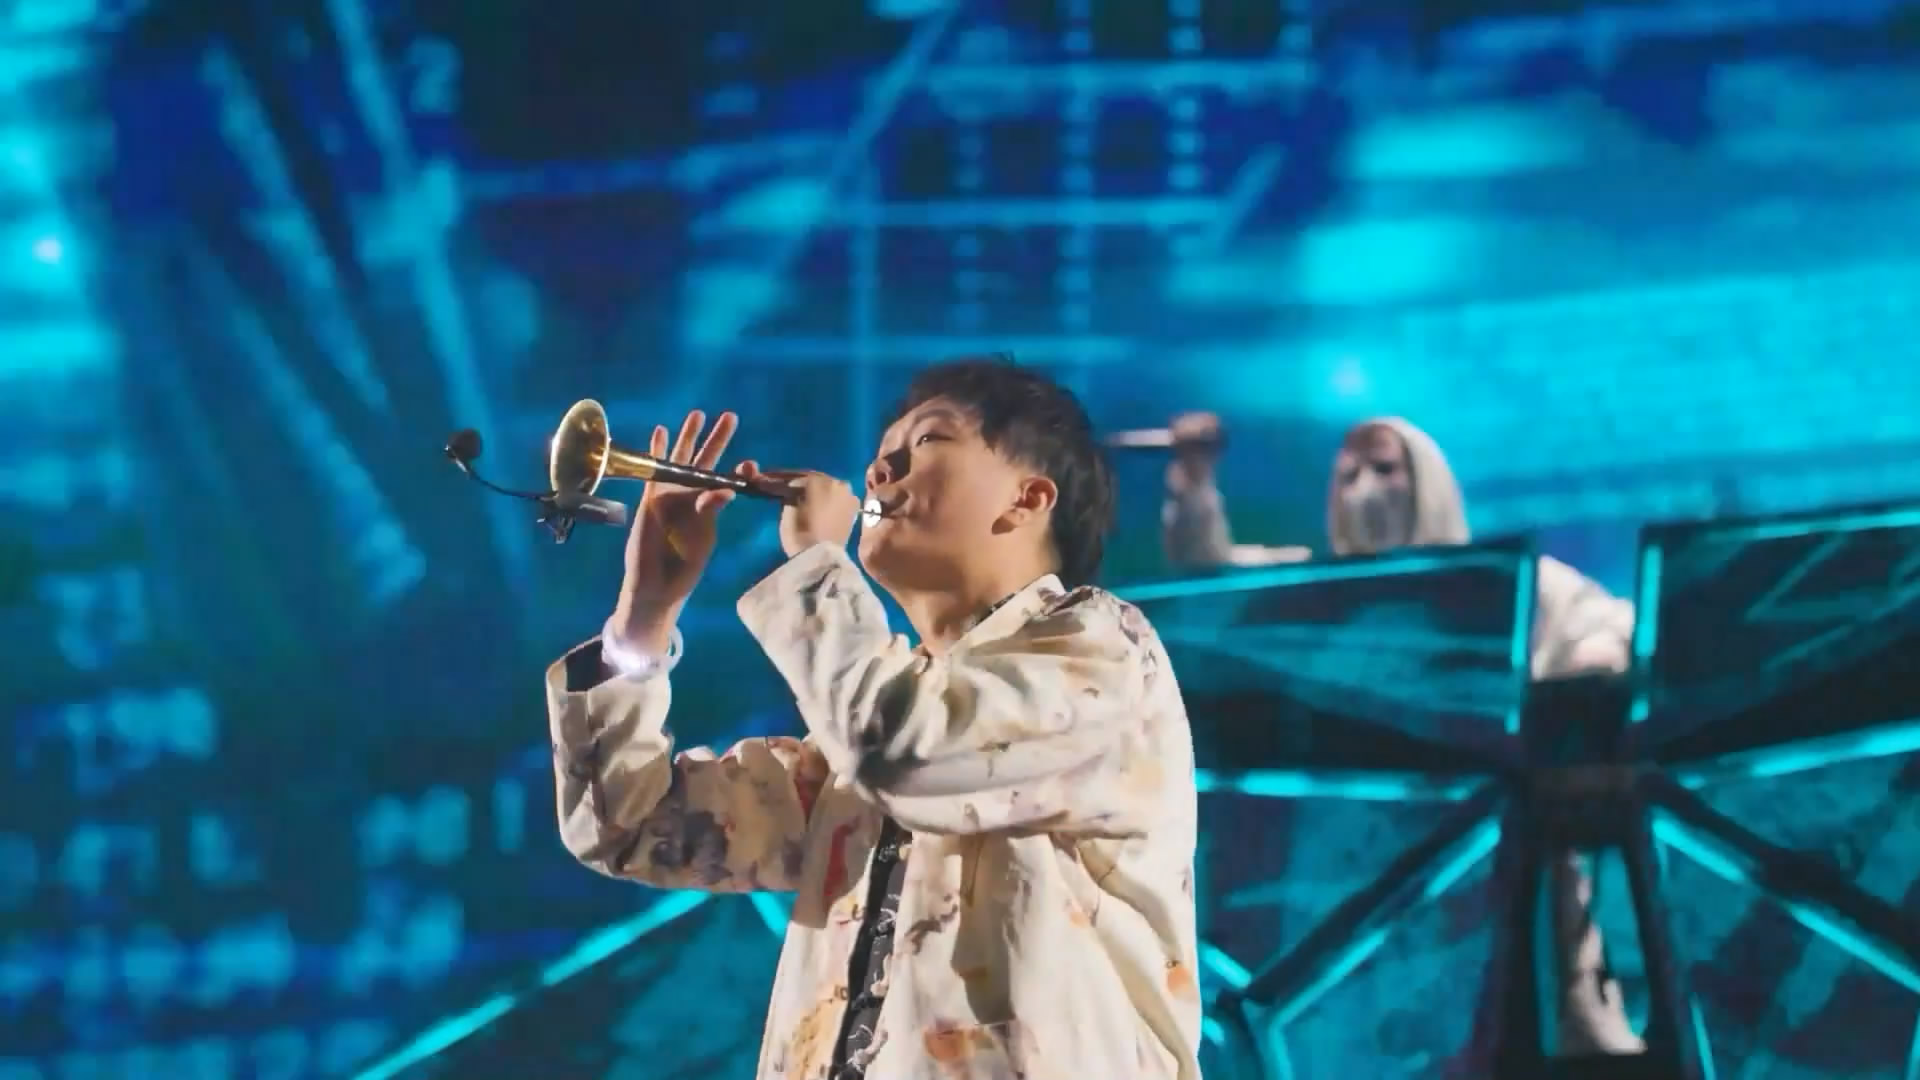 A photo shows Alan Walker (back) and suona player Chuanzi (front) performing together. /Screenshot of footage provided to CGTN